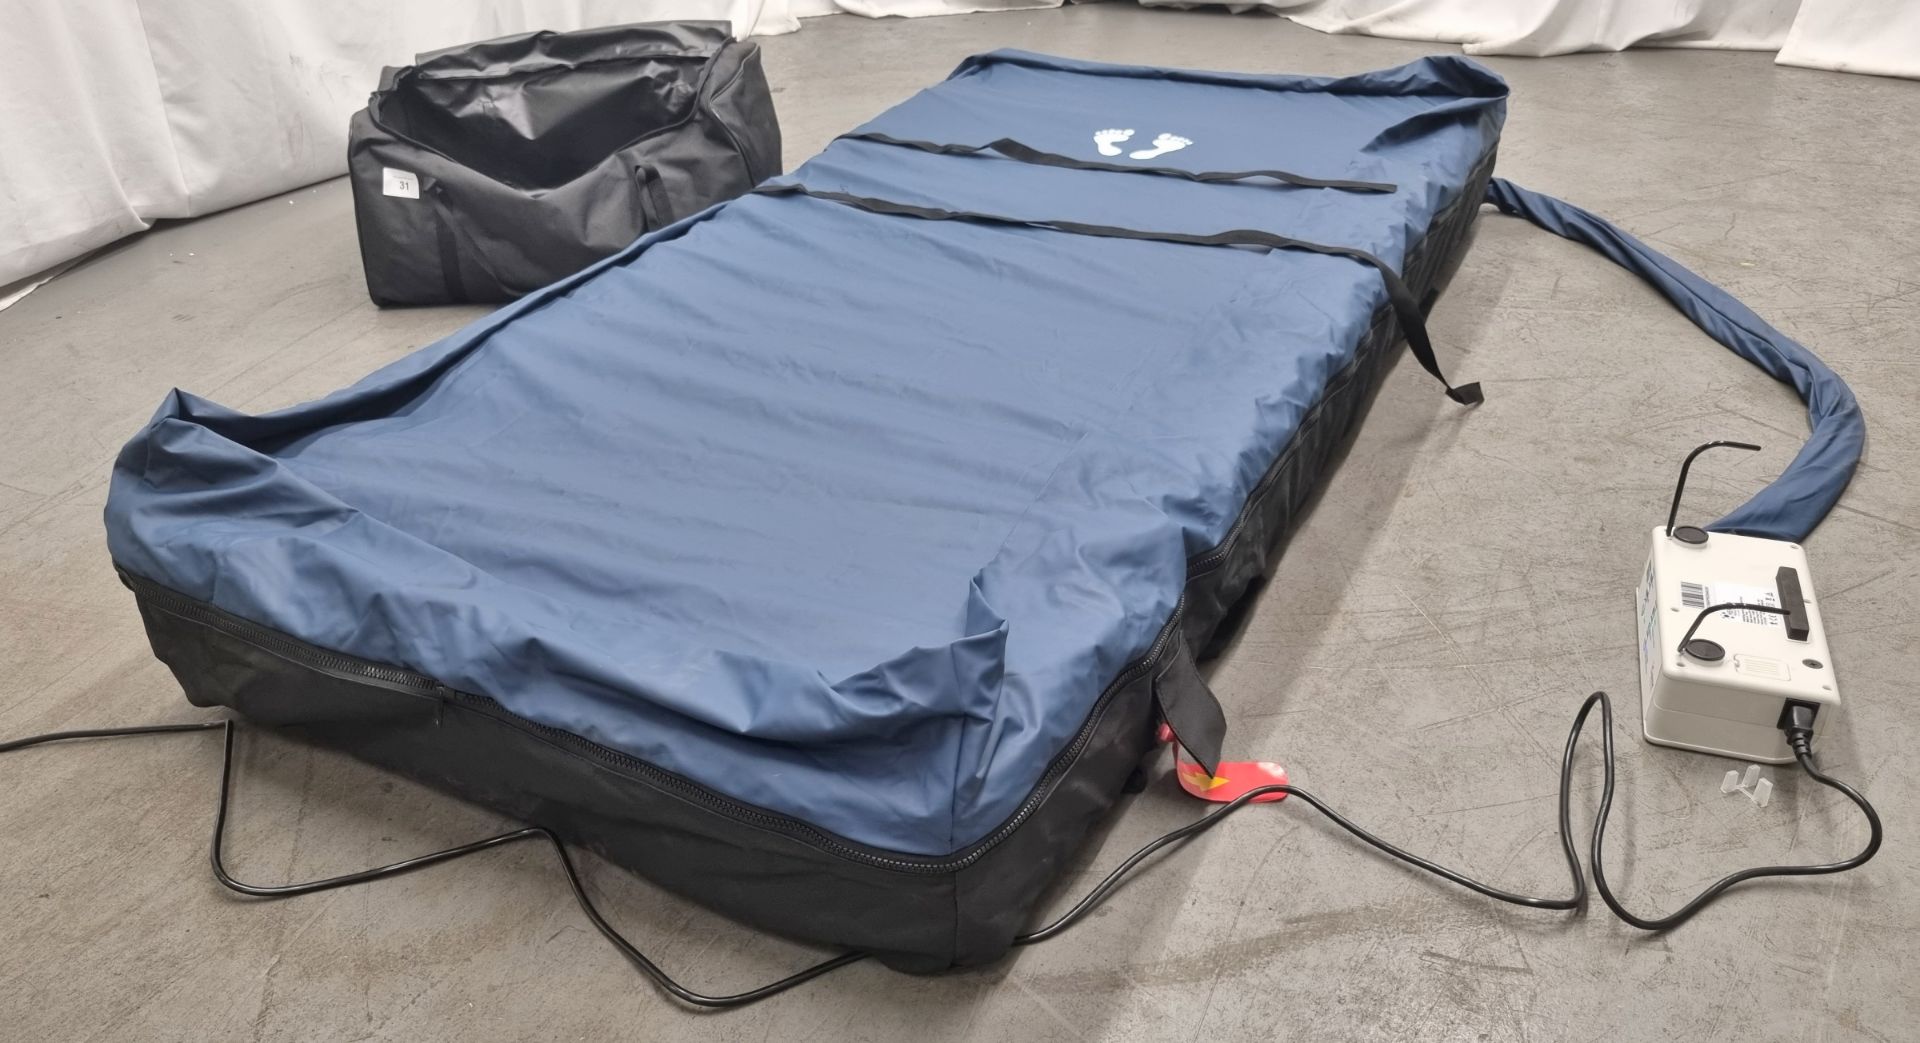 Herida Argyll II dynamic airflow mattress system with digital pump - unused in carry bag - Image 6 of 9